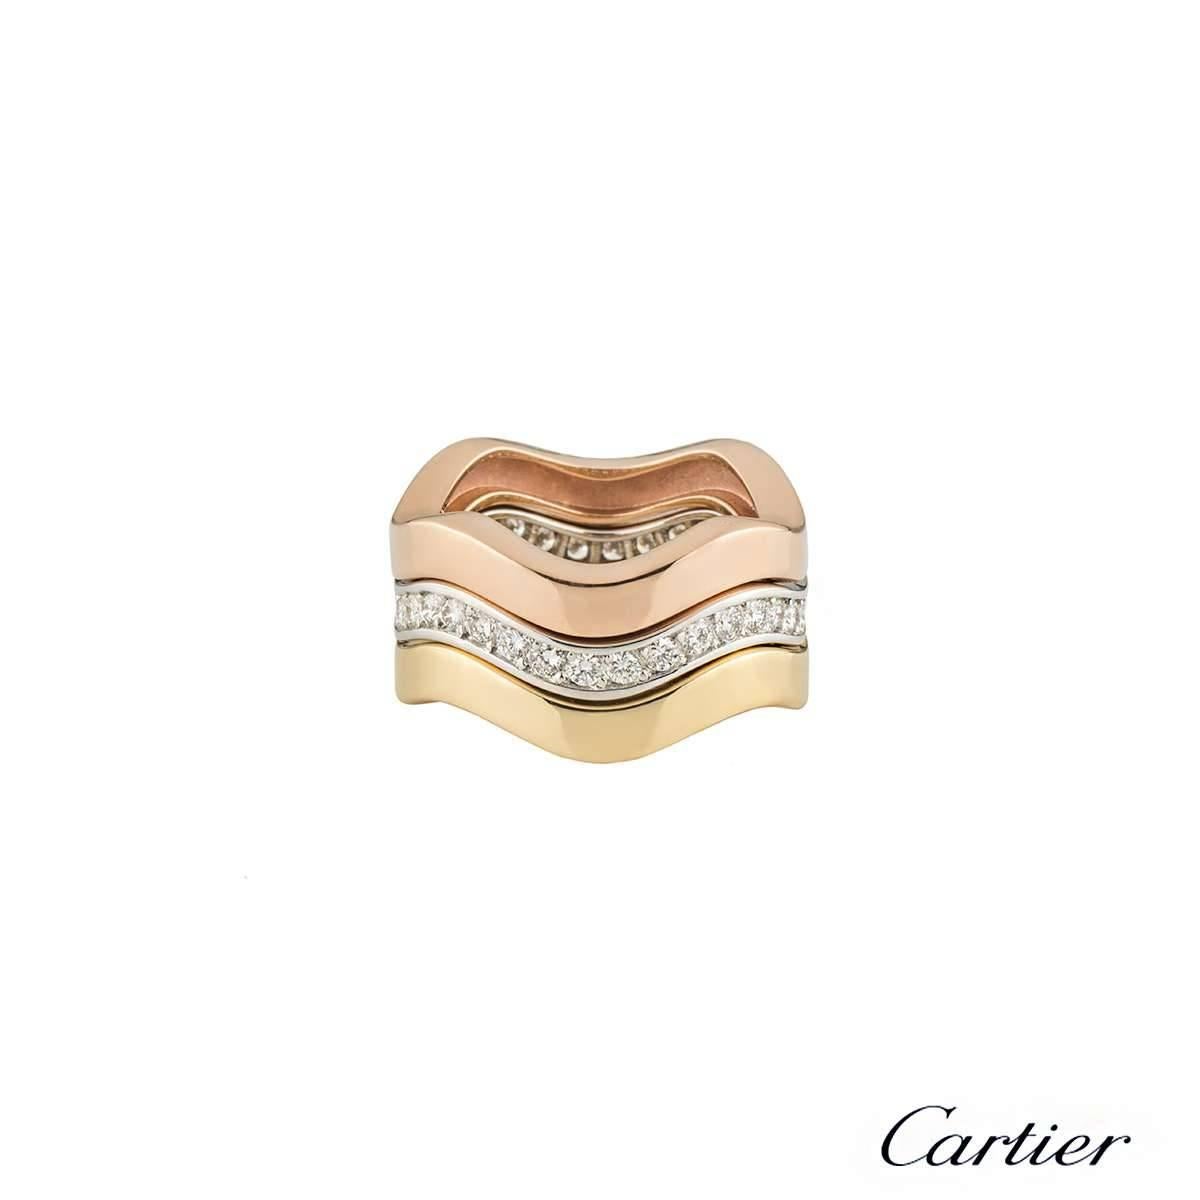 A beautiful 18k tri-colour gold Trinity stacker ring by Cartier. The ring is composed of 3 waved bands, each in yellow, rose and white gold. The white gold band is pave set with 34 round brilliant cut diamonds totalling approximately 1.02ct,